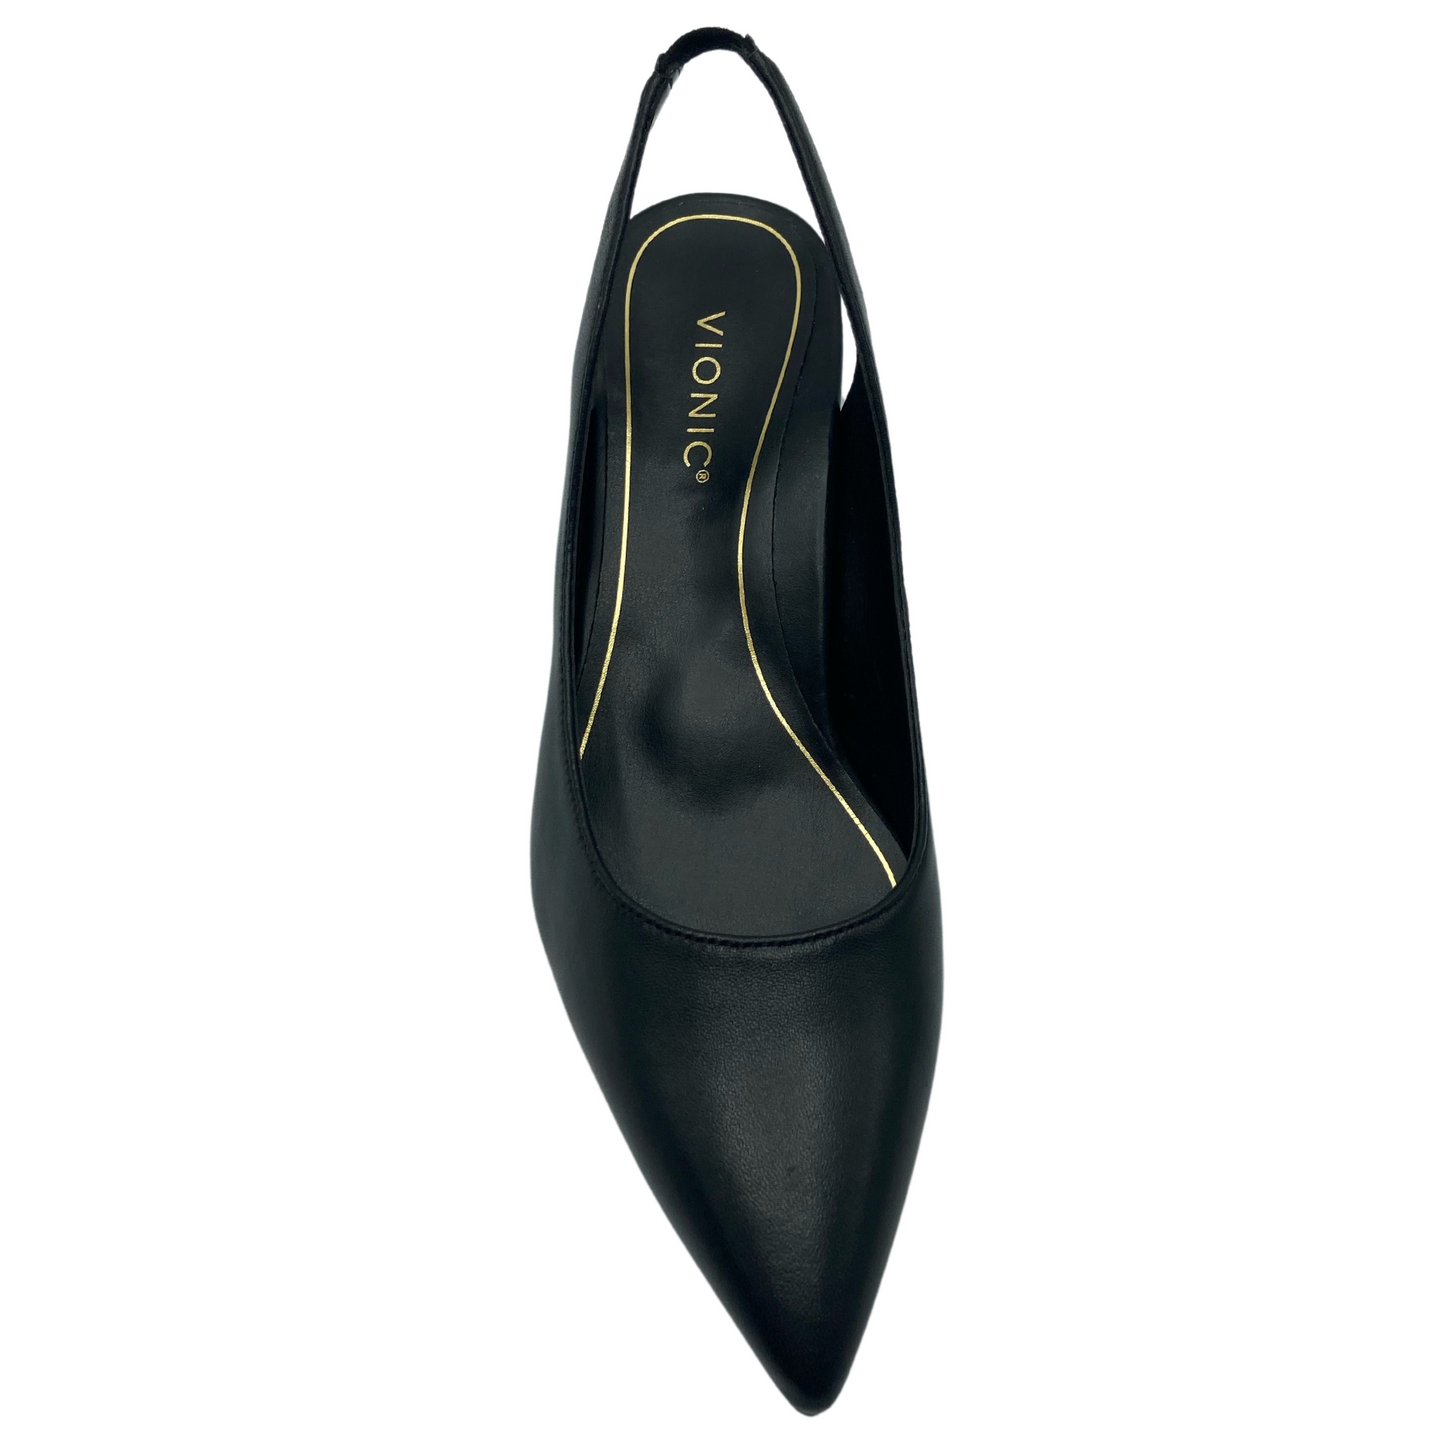 Top view of black leather sling back with pointed toe